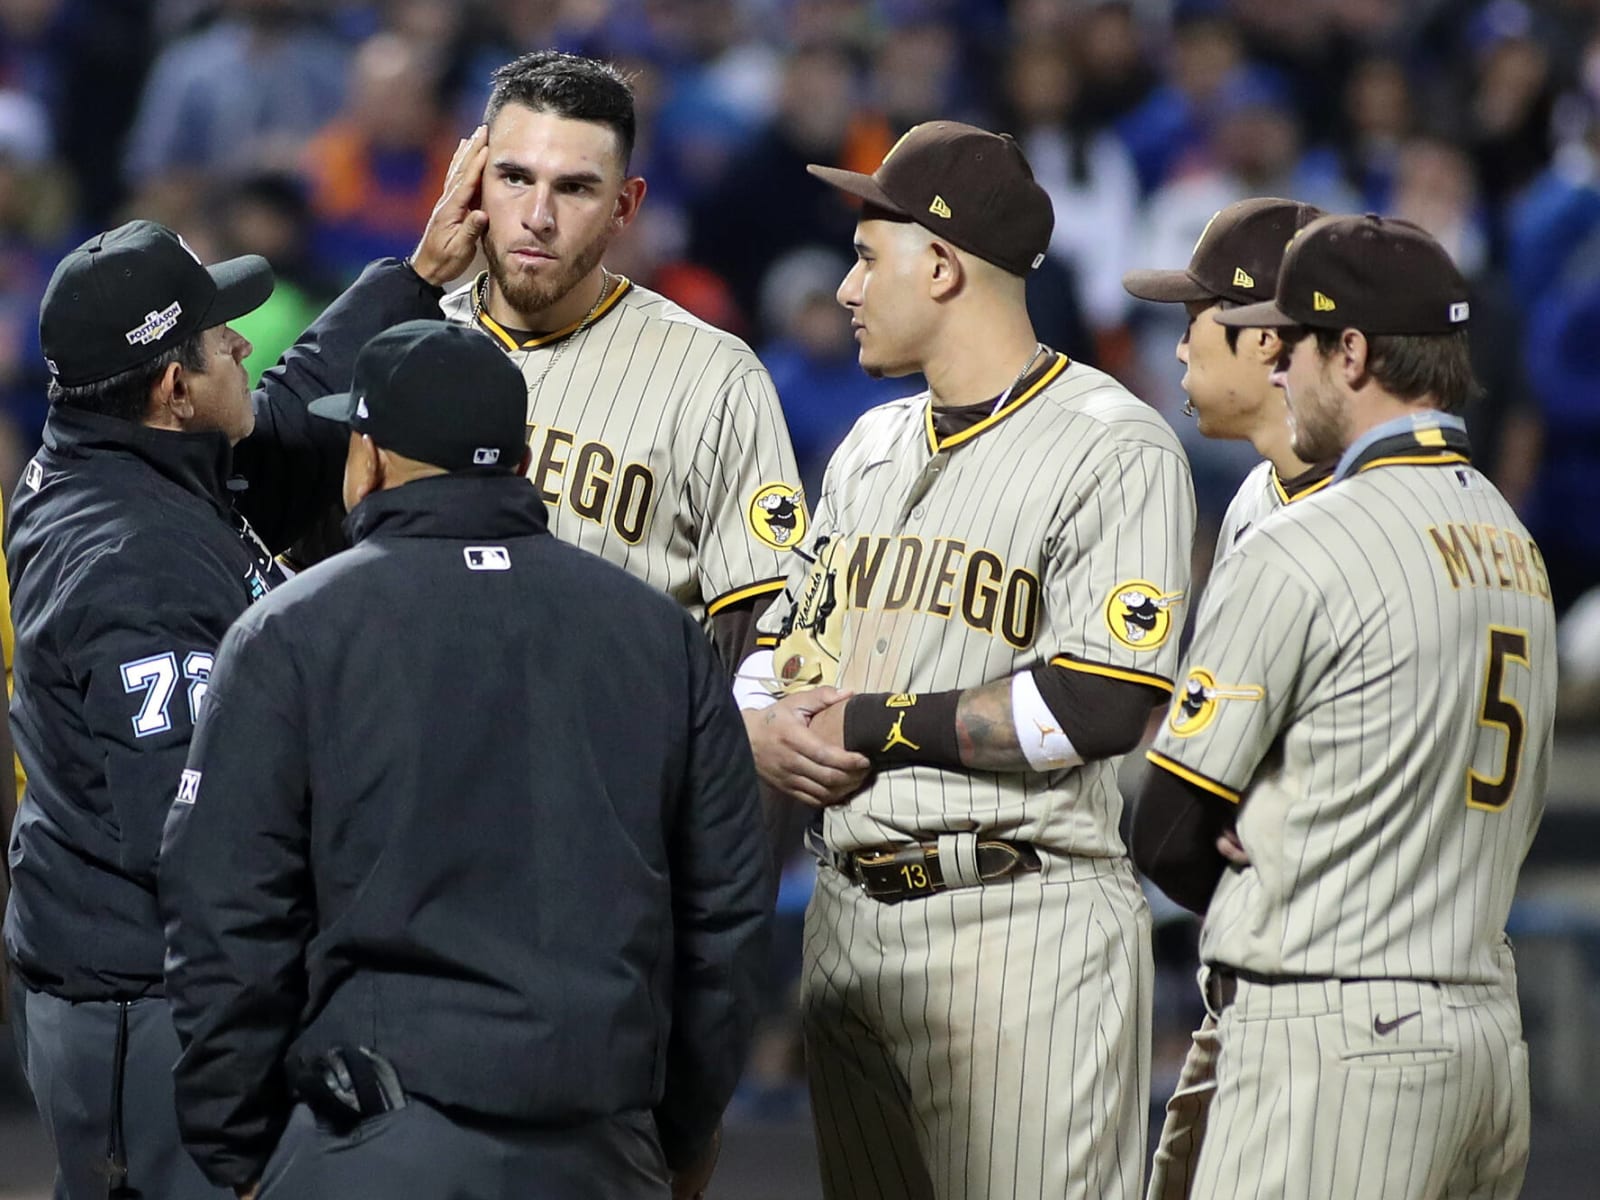 Joe Musgrove's ears checked by umps in NL Wild Card Game 3